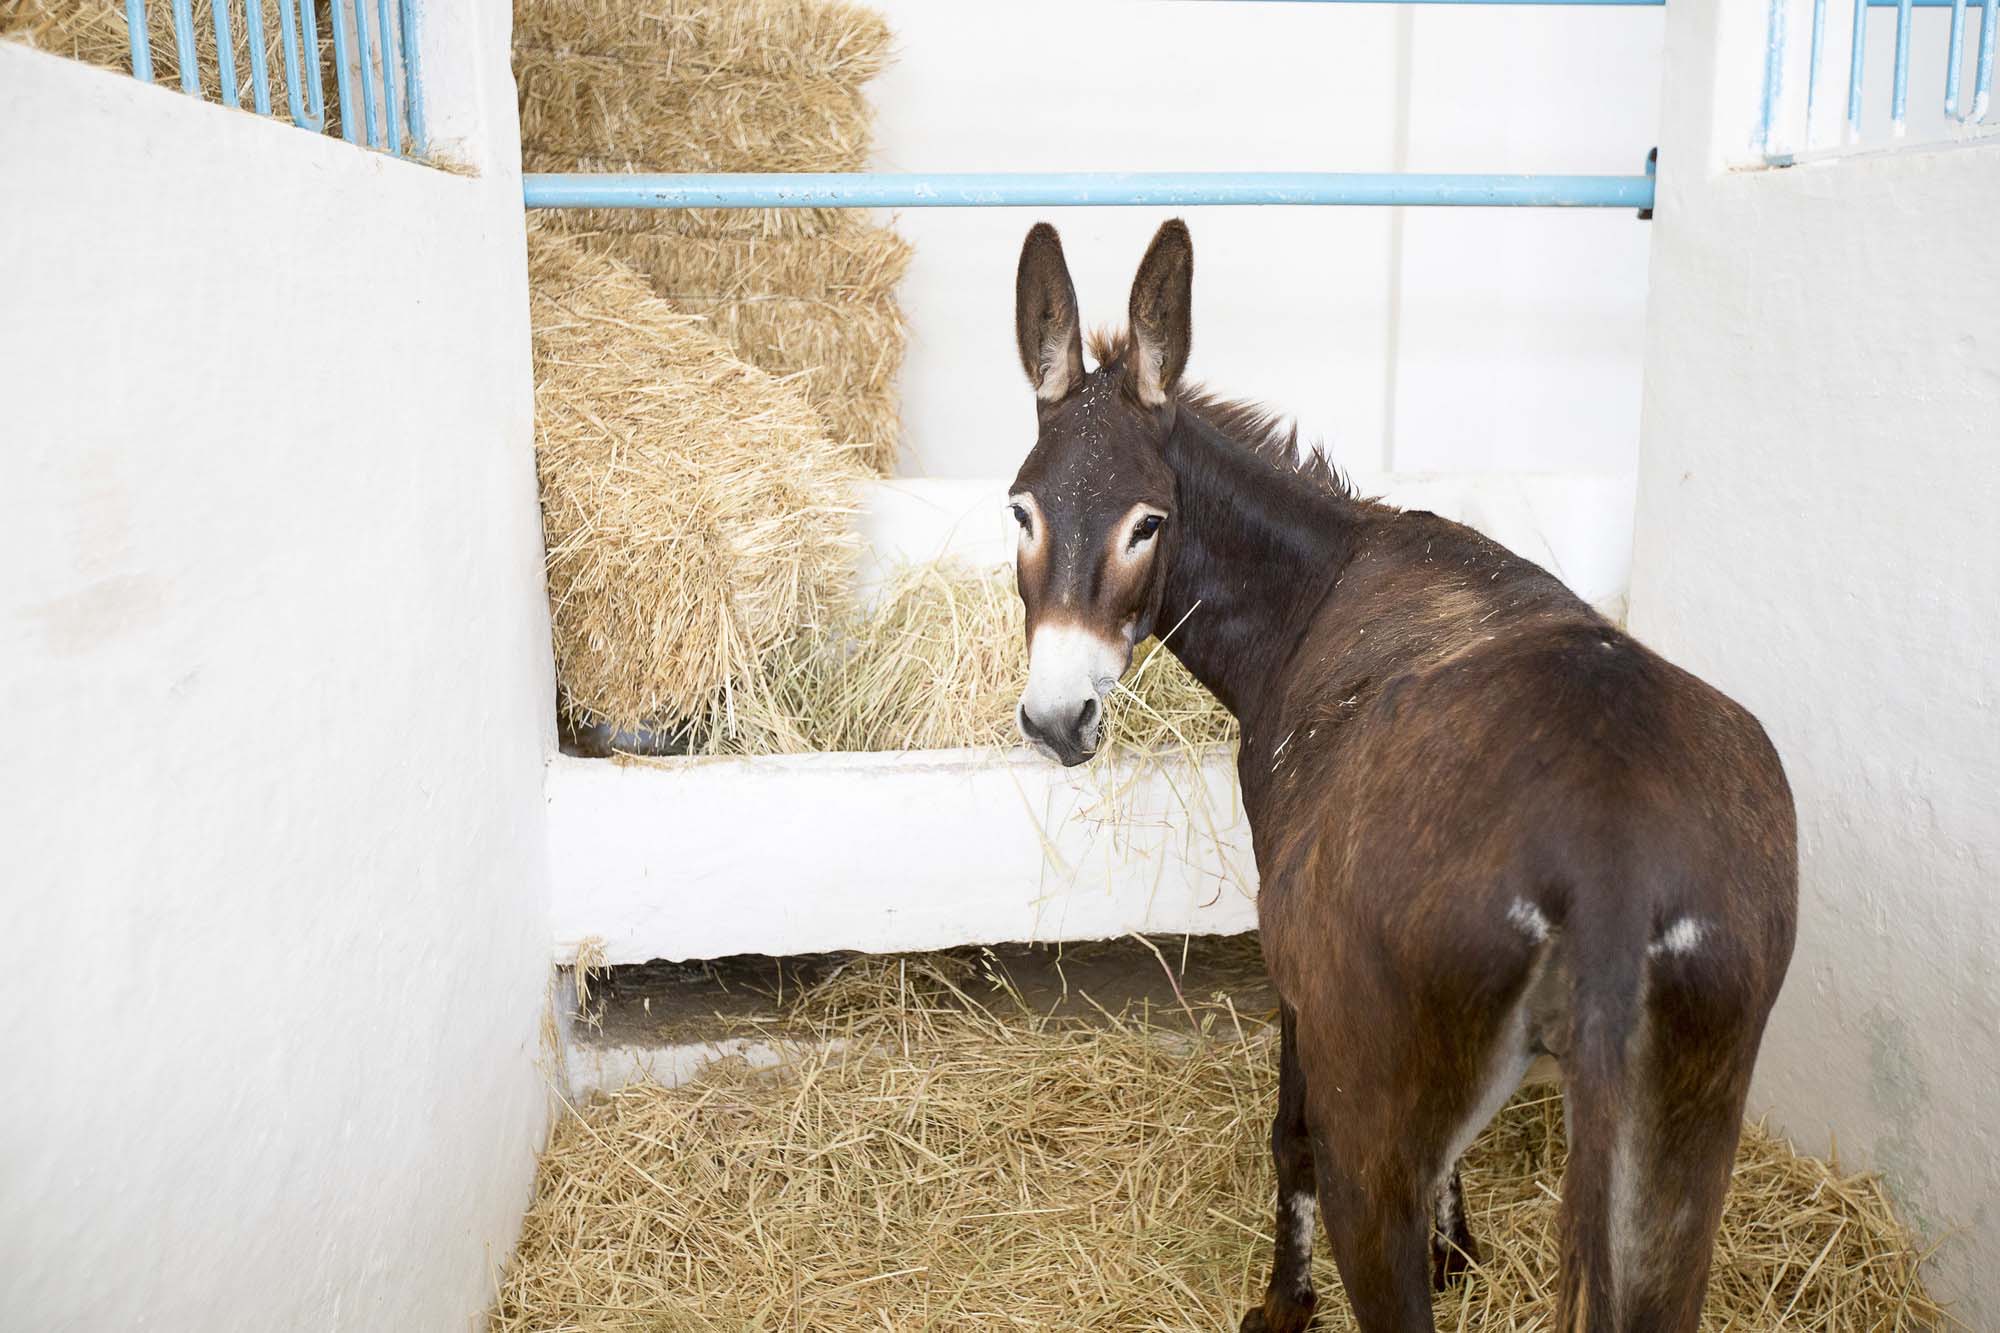 Discover what the best food is to feed donkeys, what they enjoy for treats ...